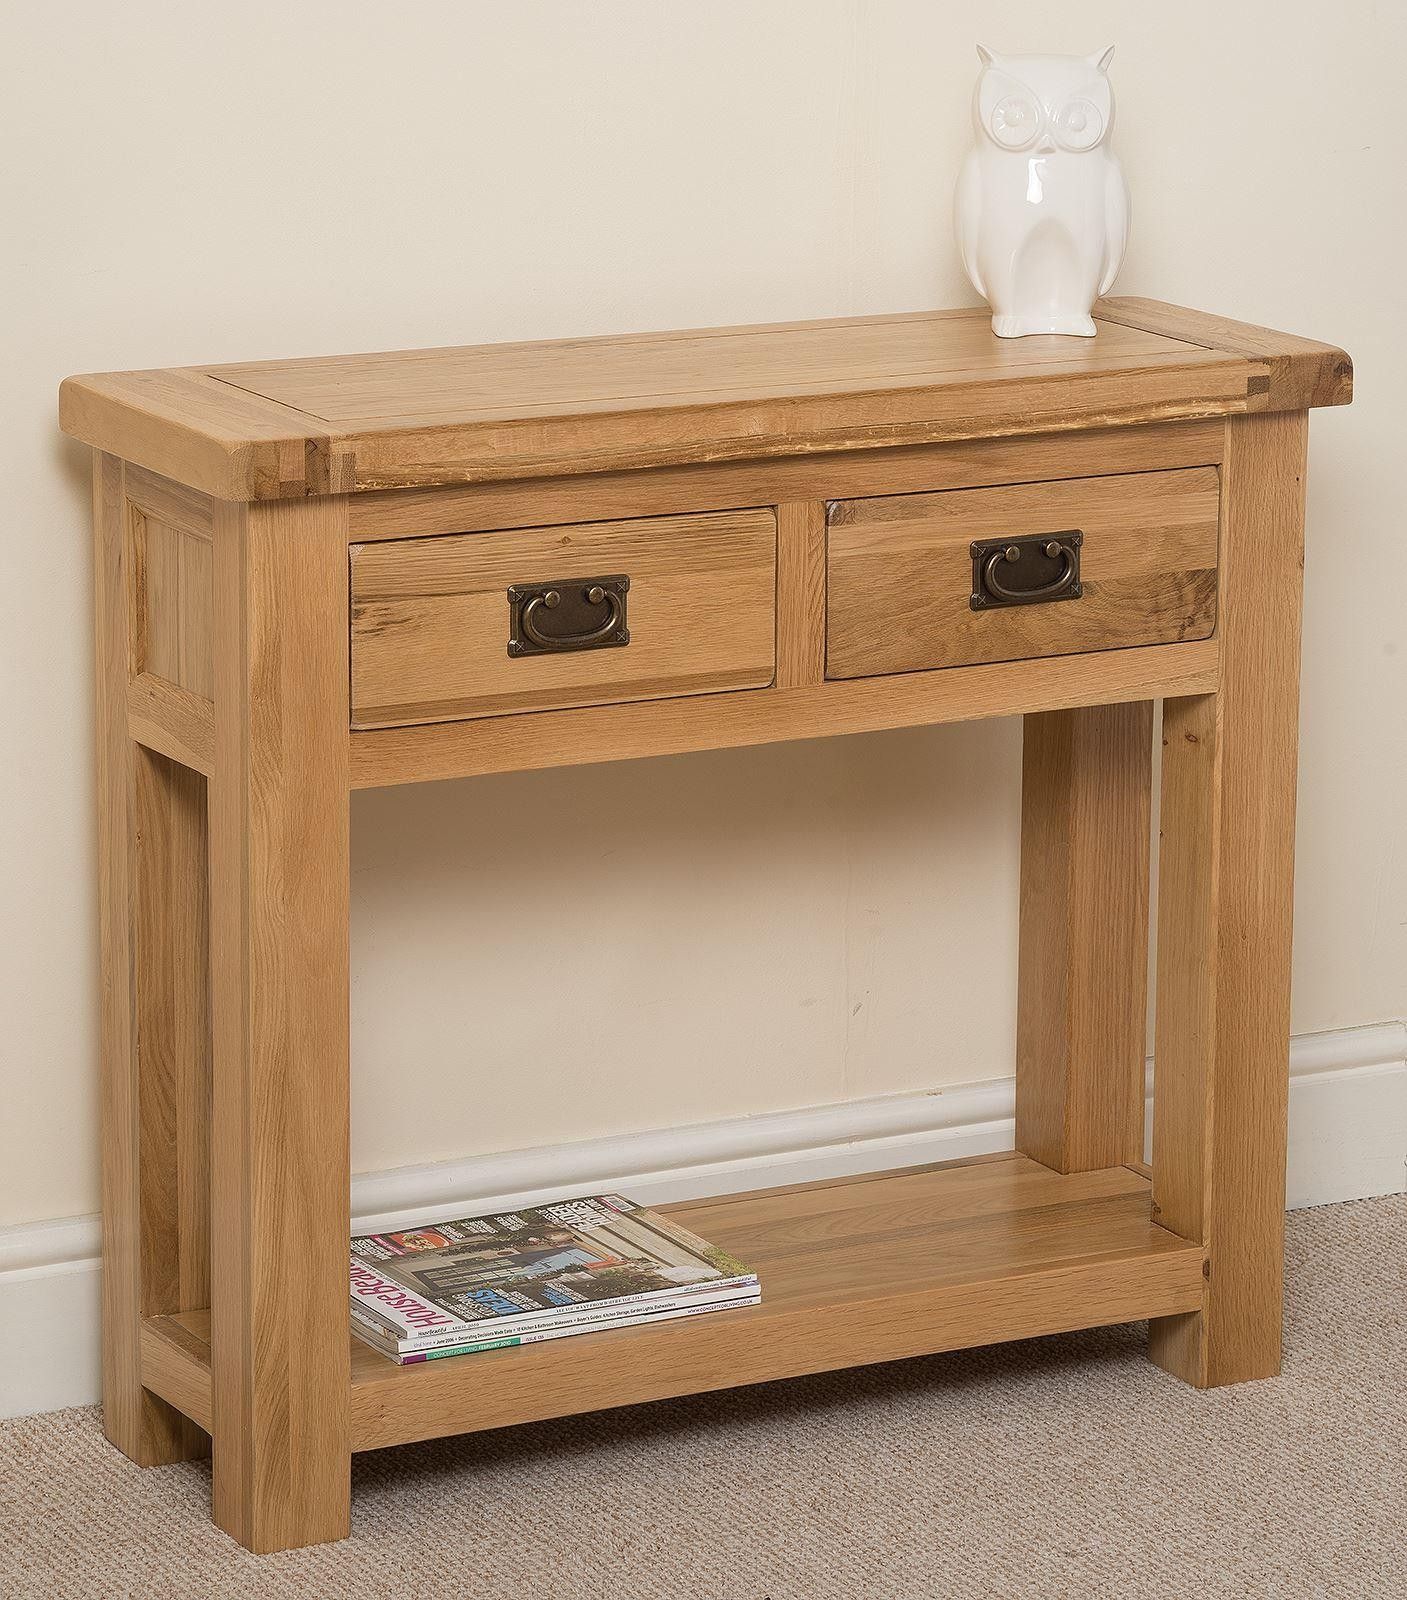 Cottage Light Solid Oak Console Table | Modern Furniture Pertaining To Modern Console Tables (View 12 of 20)